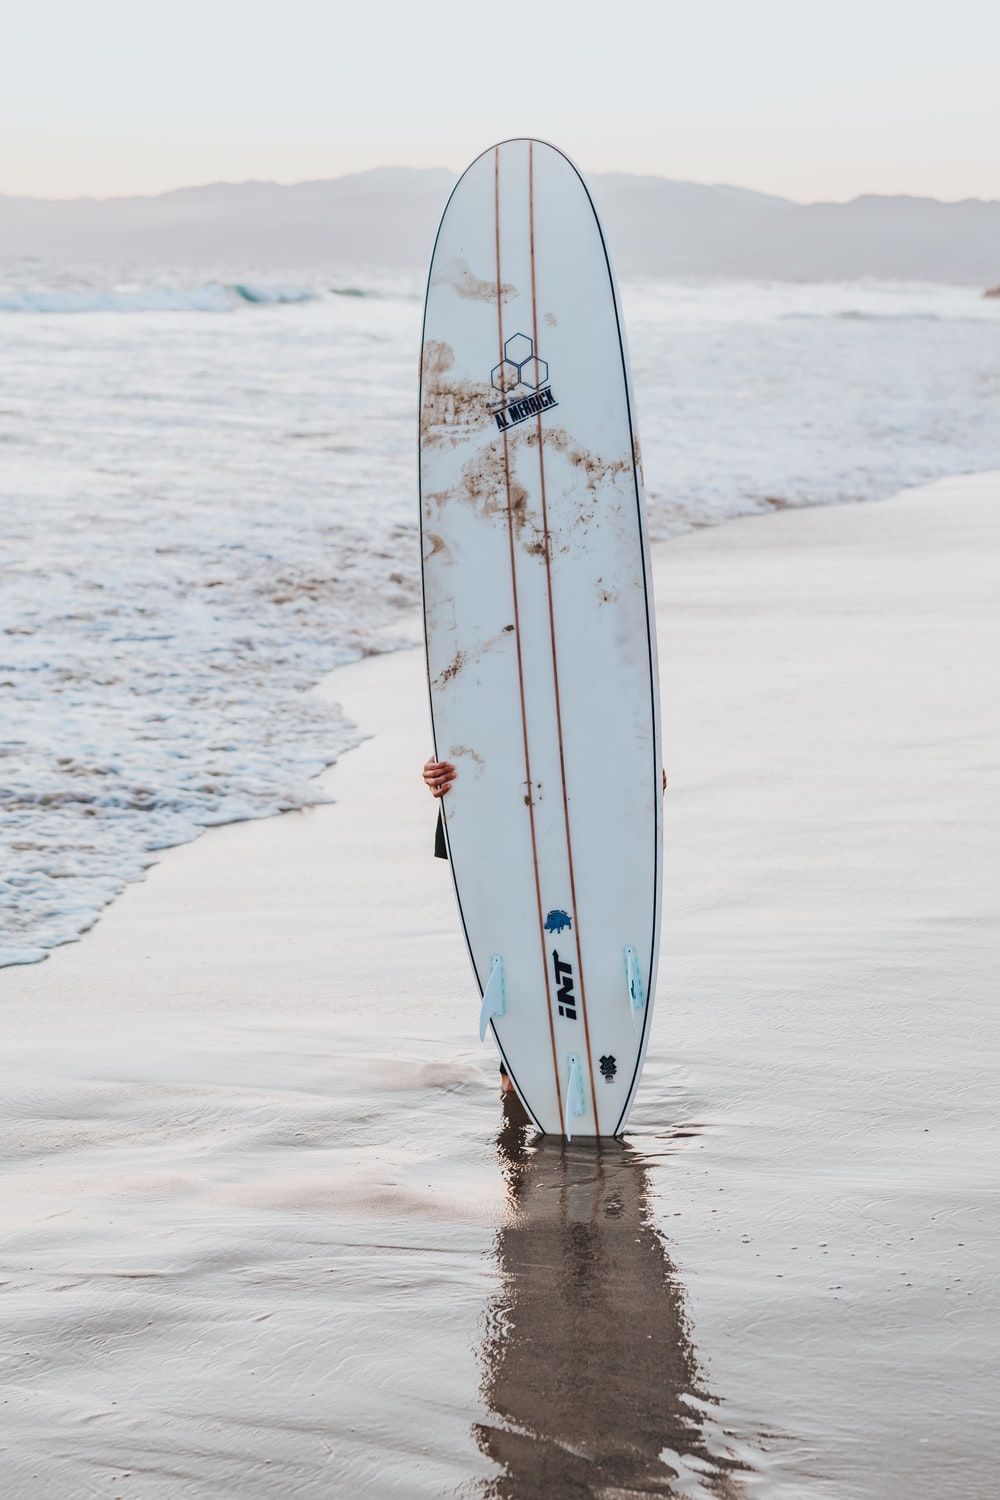 Surf Board Picture. Download Free Image